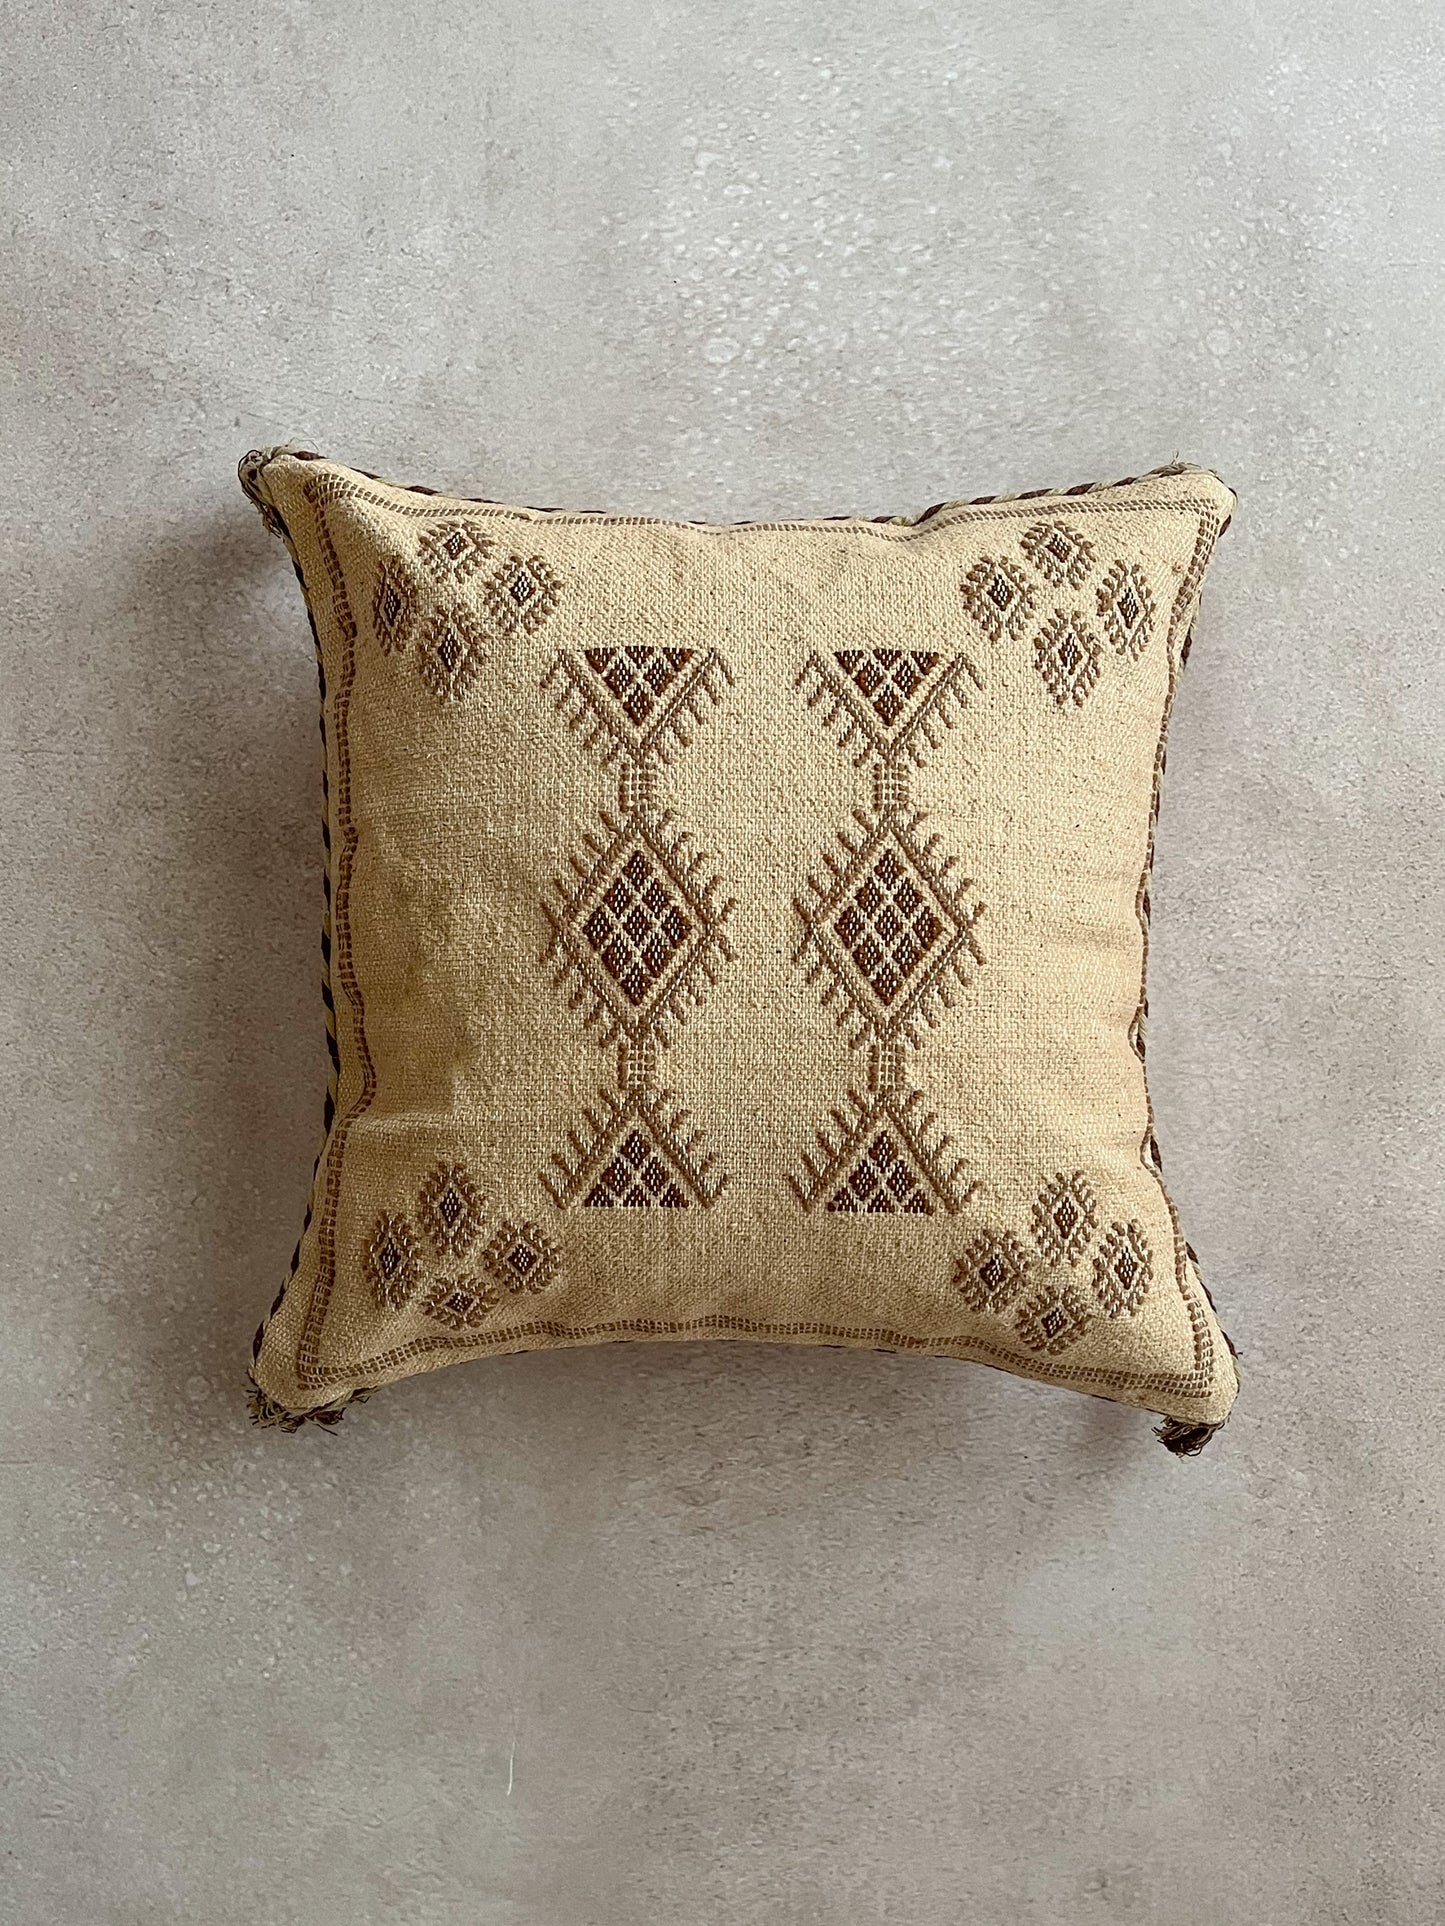 Brown colored cushion with embroidery